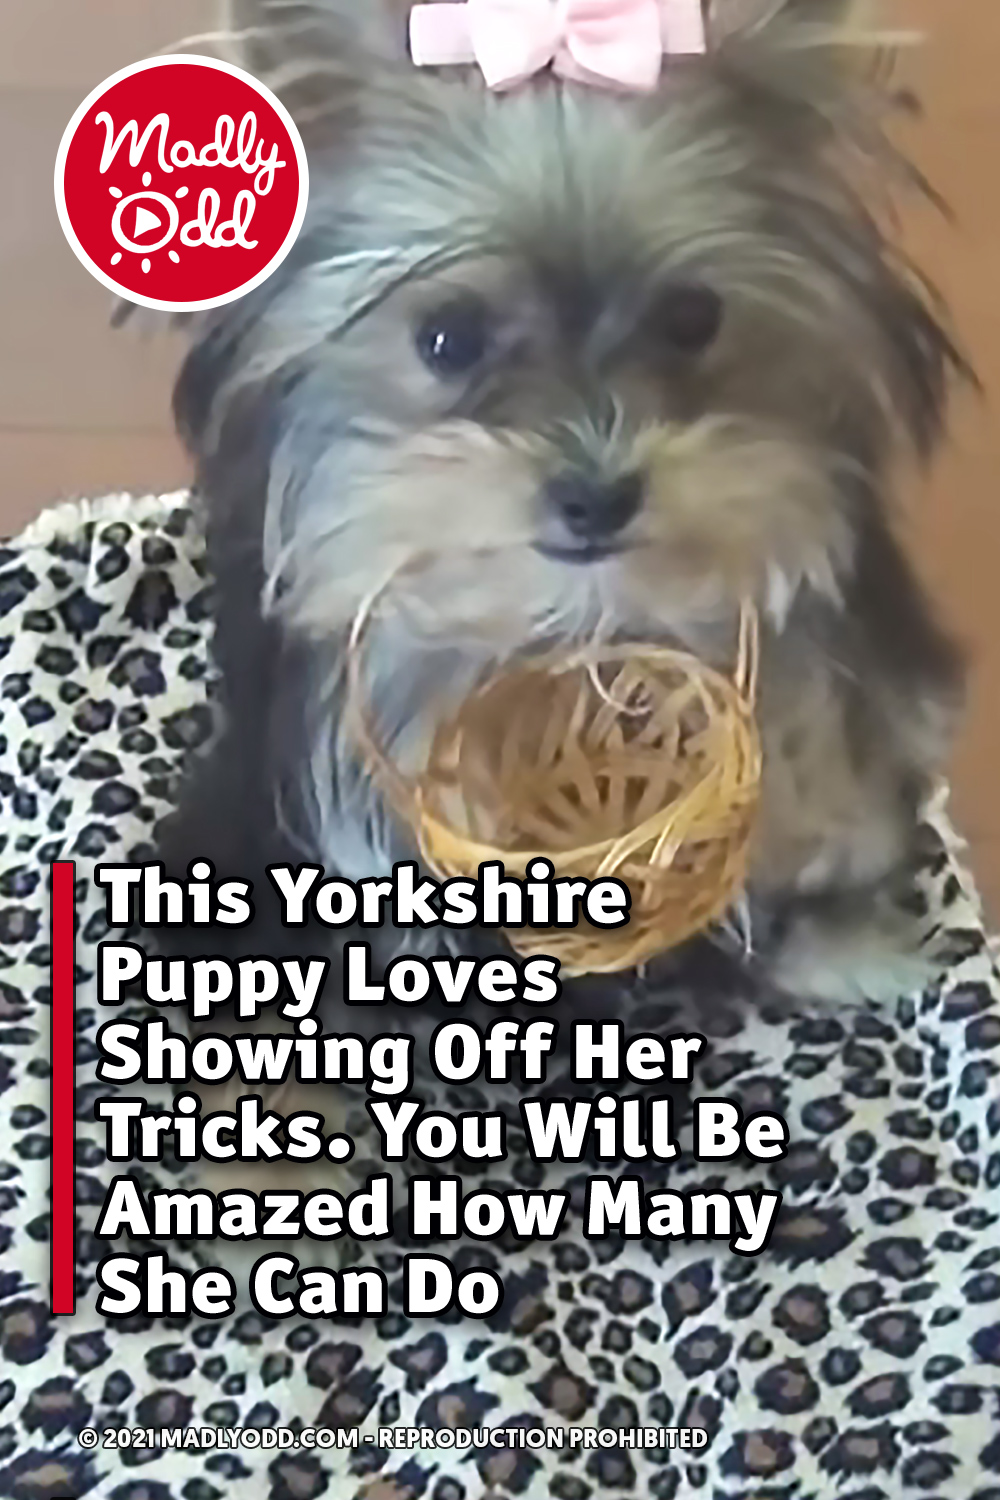 This Yorkshire Puppy Loves Showing Off Her Tricks. You Will Be Amazed How Many She Can Do